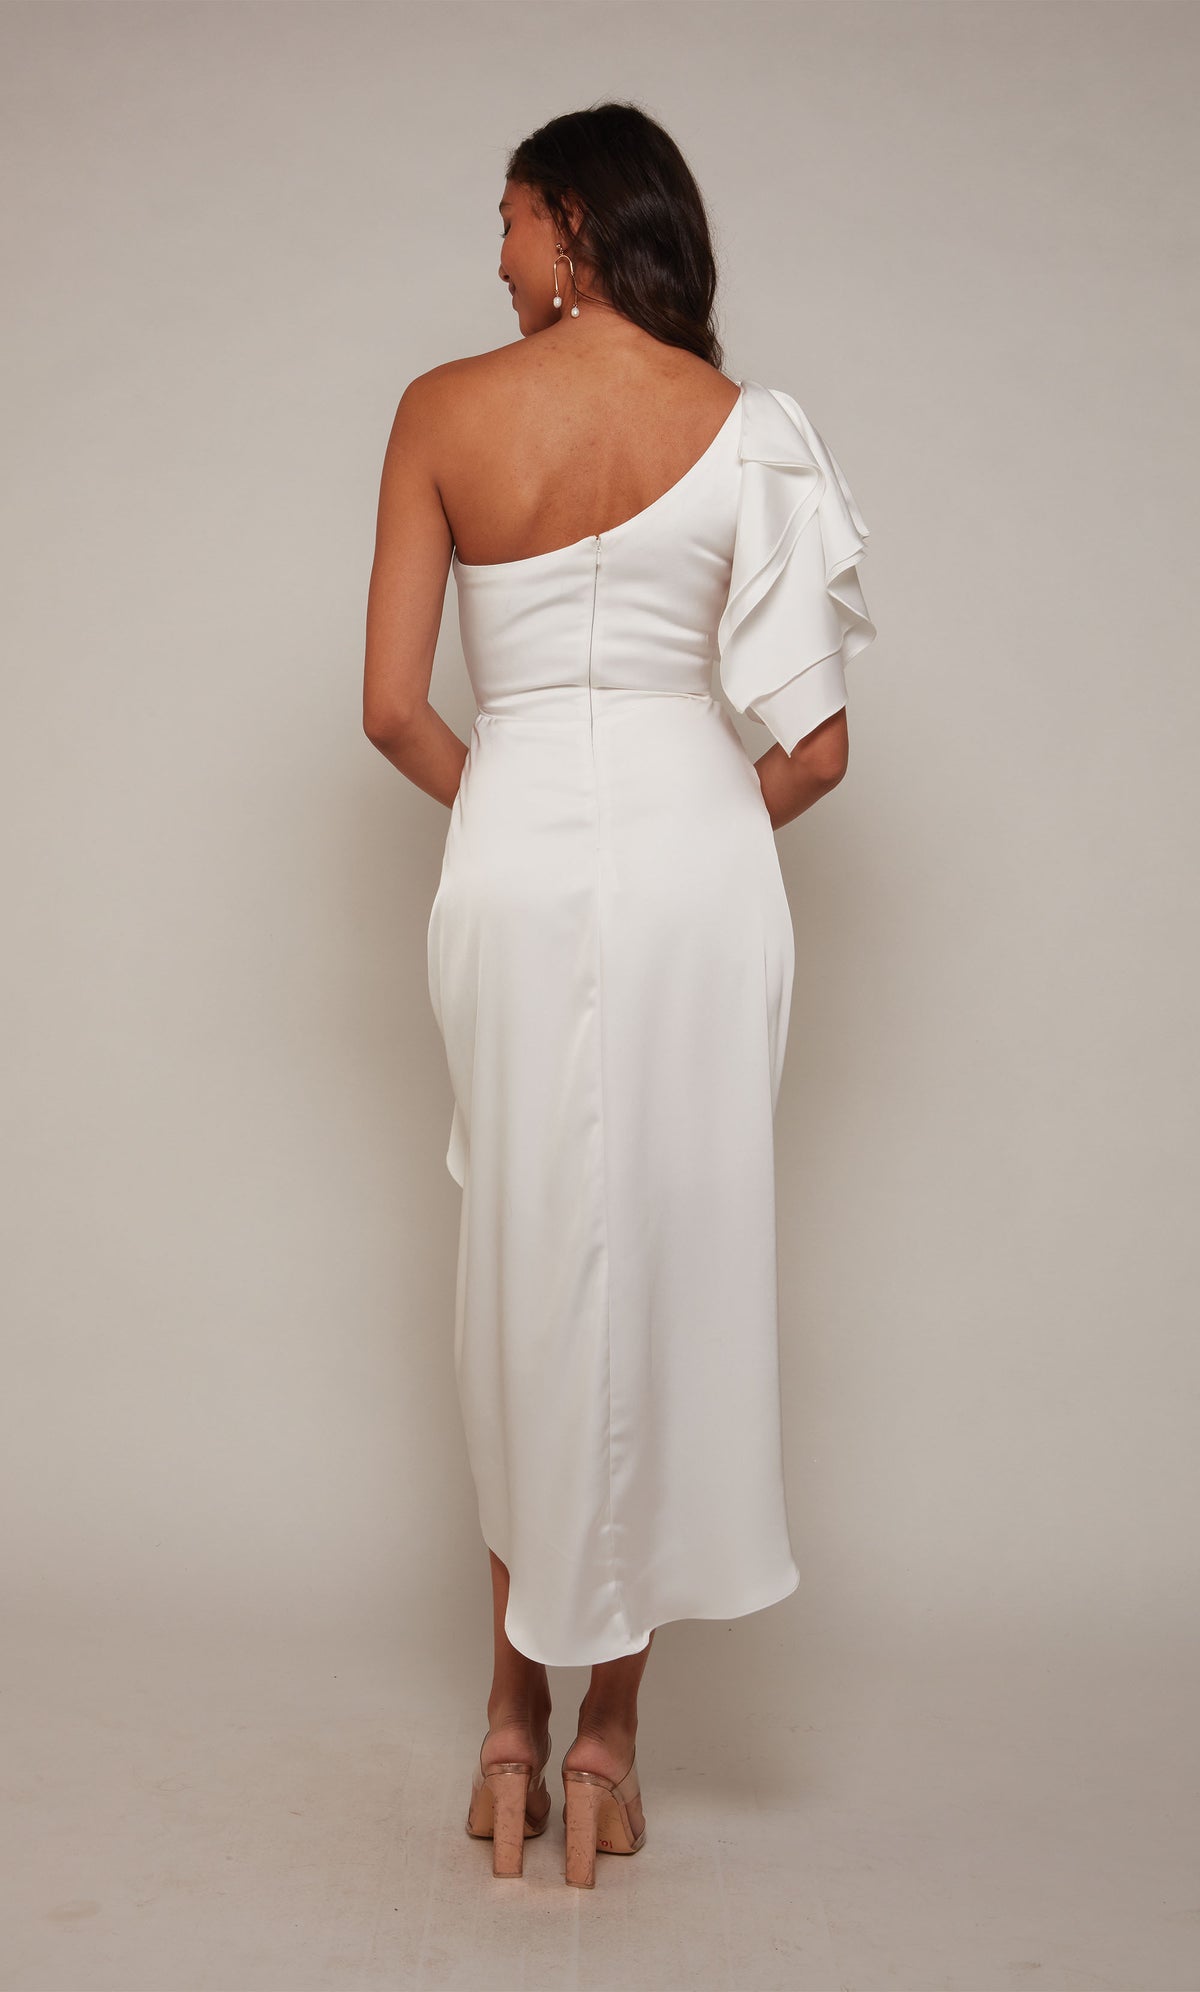 A white one shoulder cocktail dress with an asymmetrical hemline, ruffle shoulder, and a zip-up back closure.